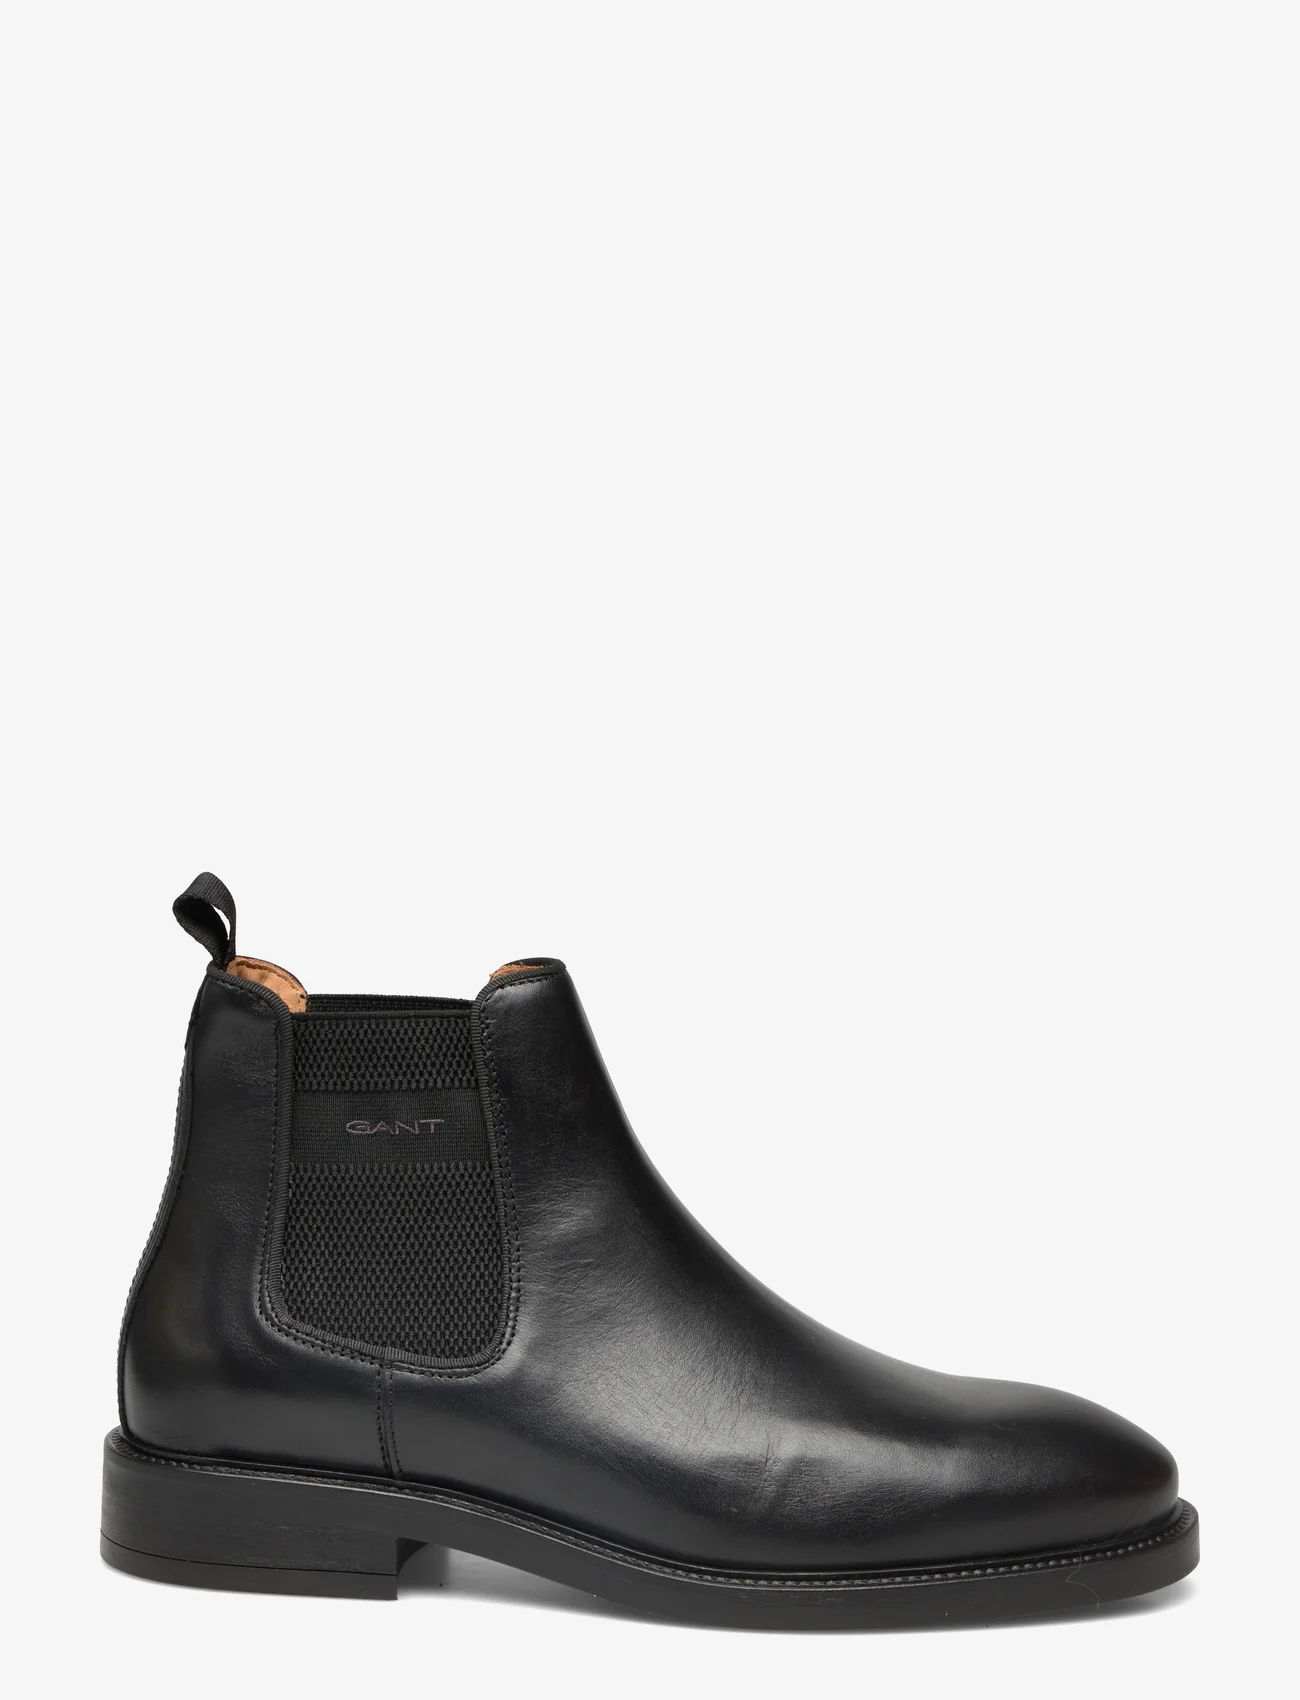 GANT - Flairville Chelsea Boot - birthday gifts - black - 1